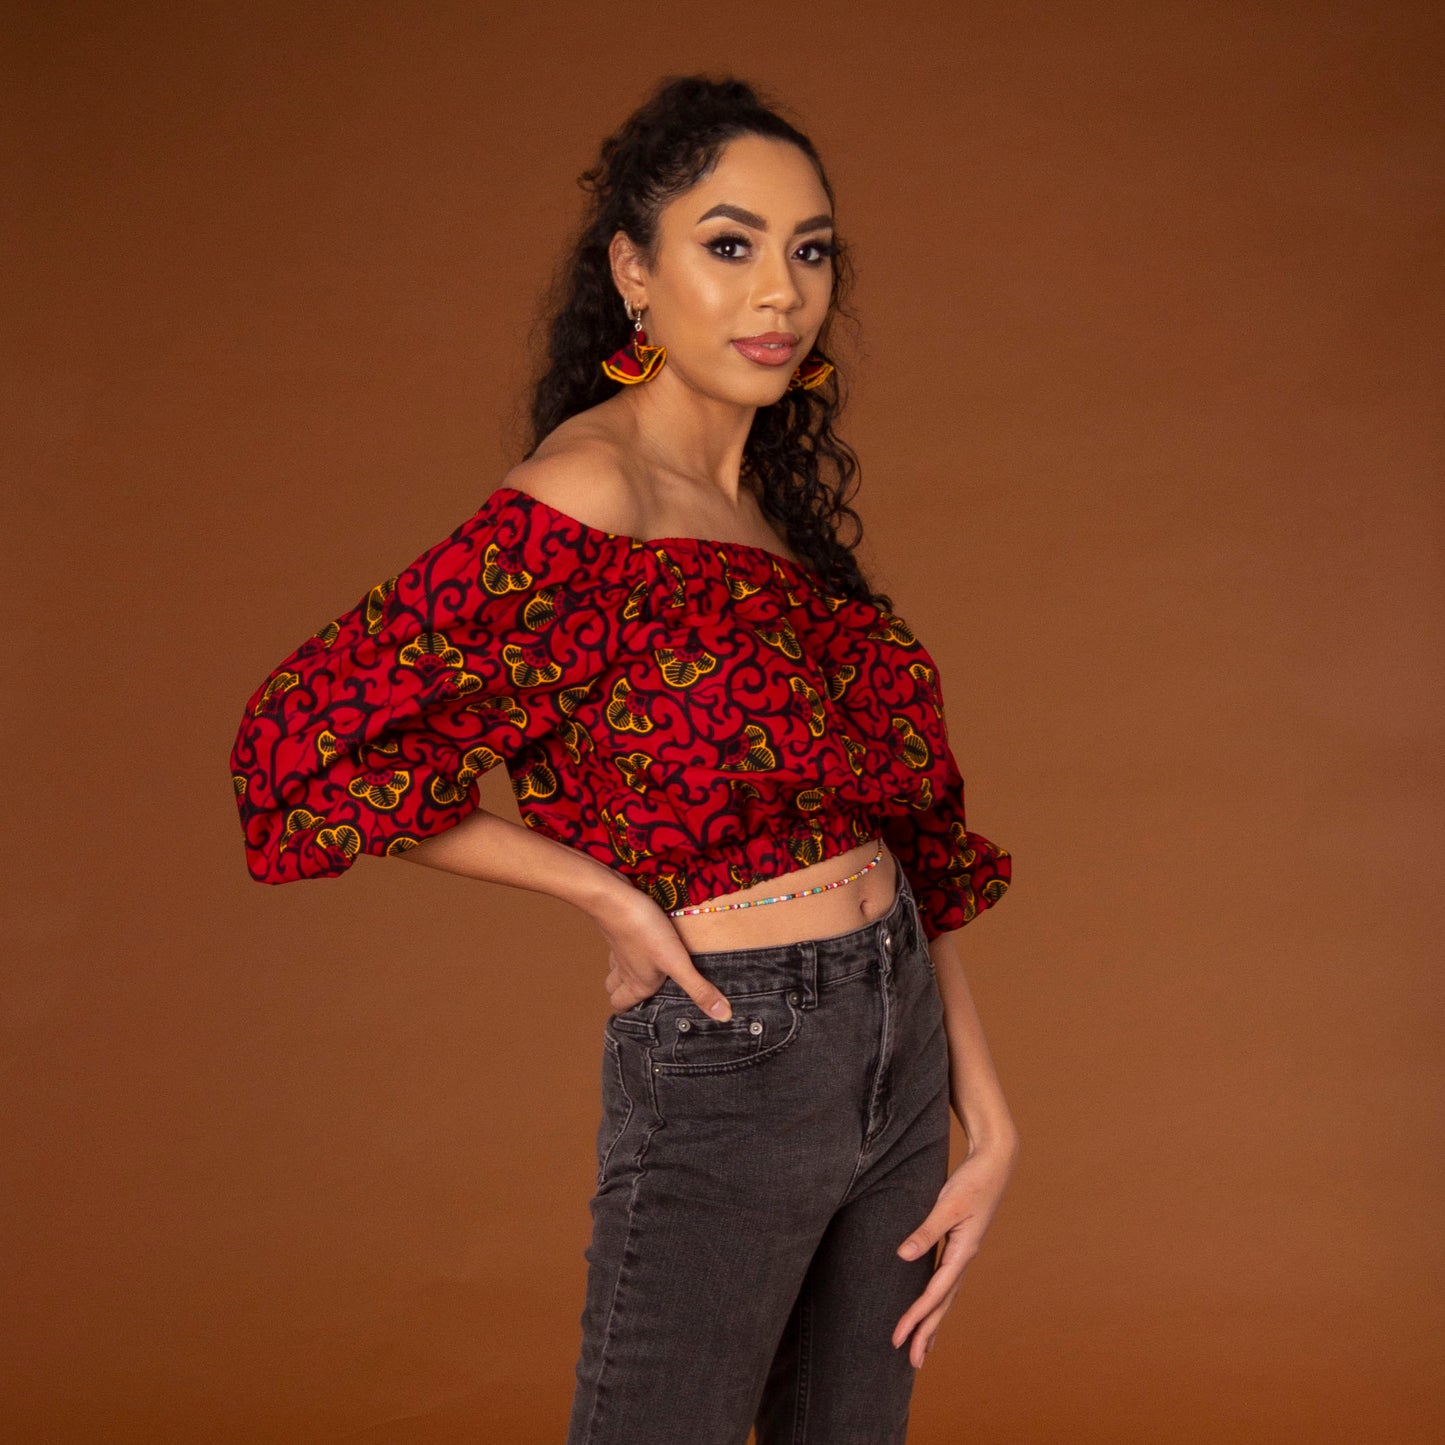 Off-shoulder African print crop top with three-quarter balloon sleeves and elasticated waist, arms and neckline in red and yellow ankara wax print